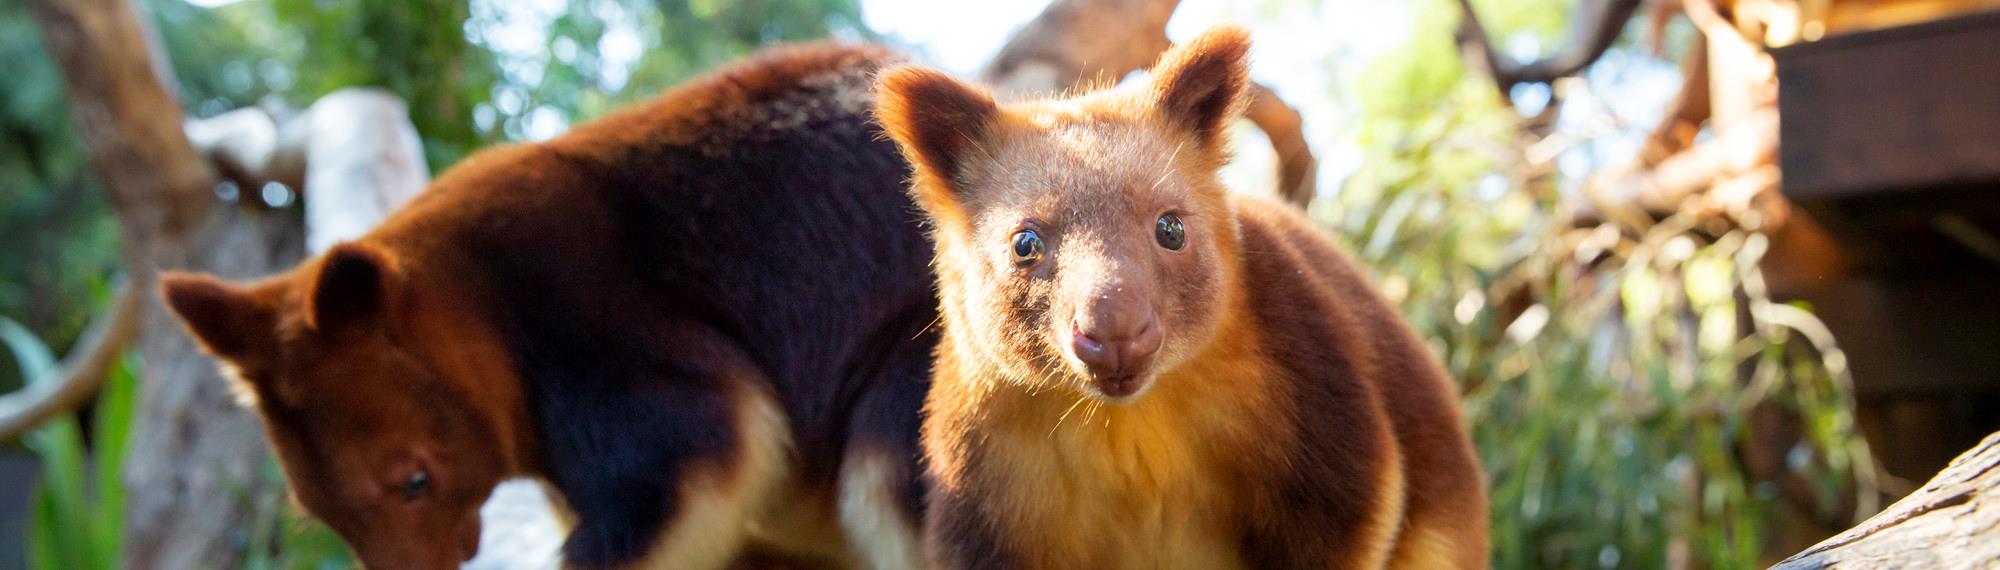 Two Goodfellow's Tree Kangaroos, one staring directly into the camera and another Tree Kangaroo in the background, perching on a branch.